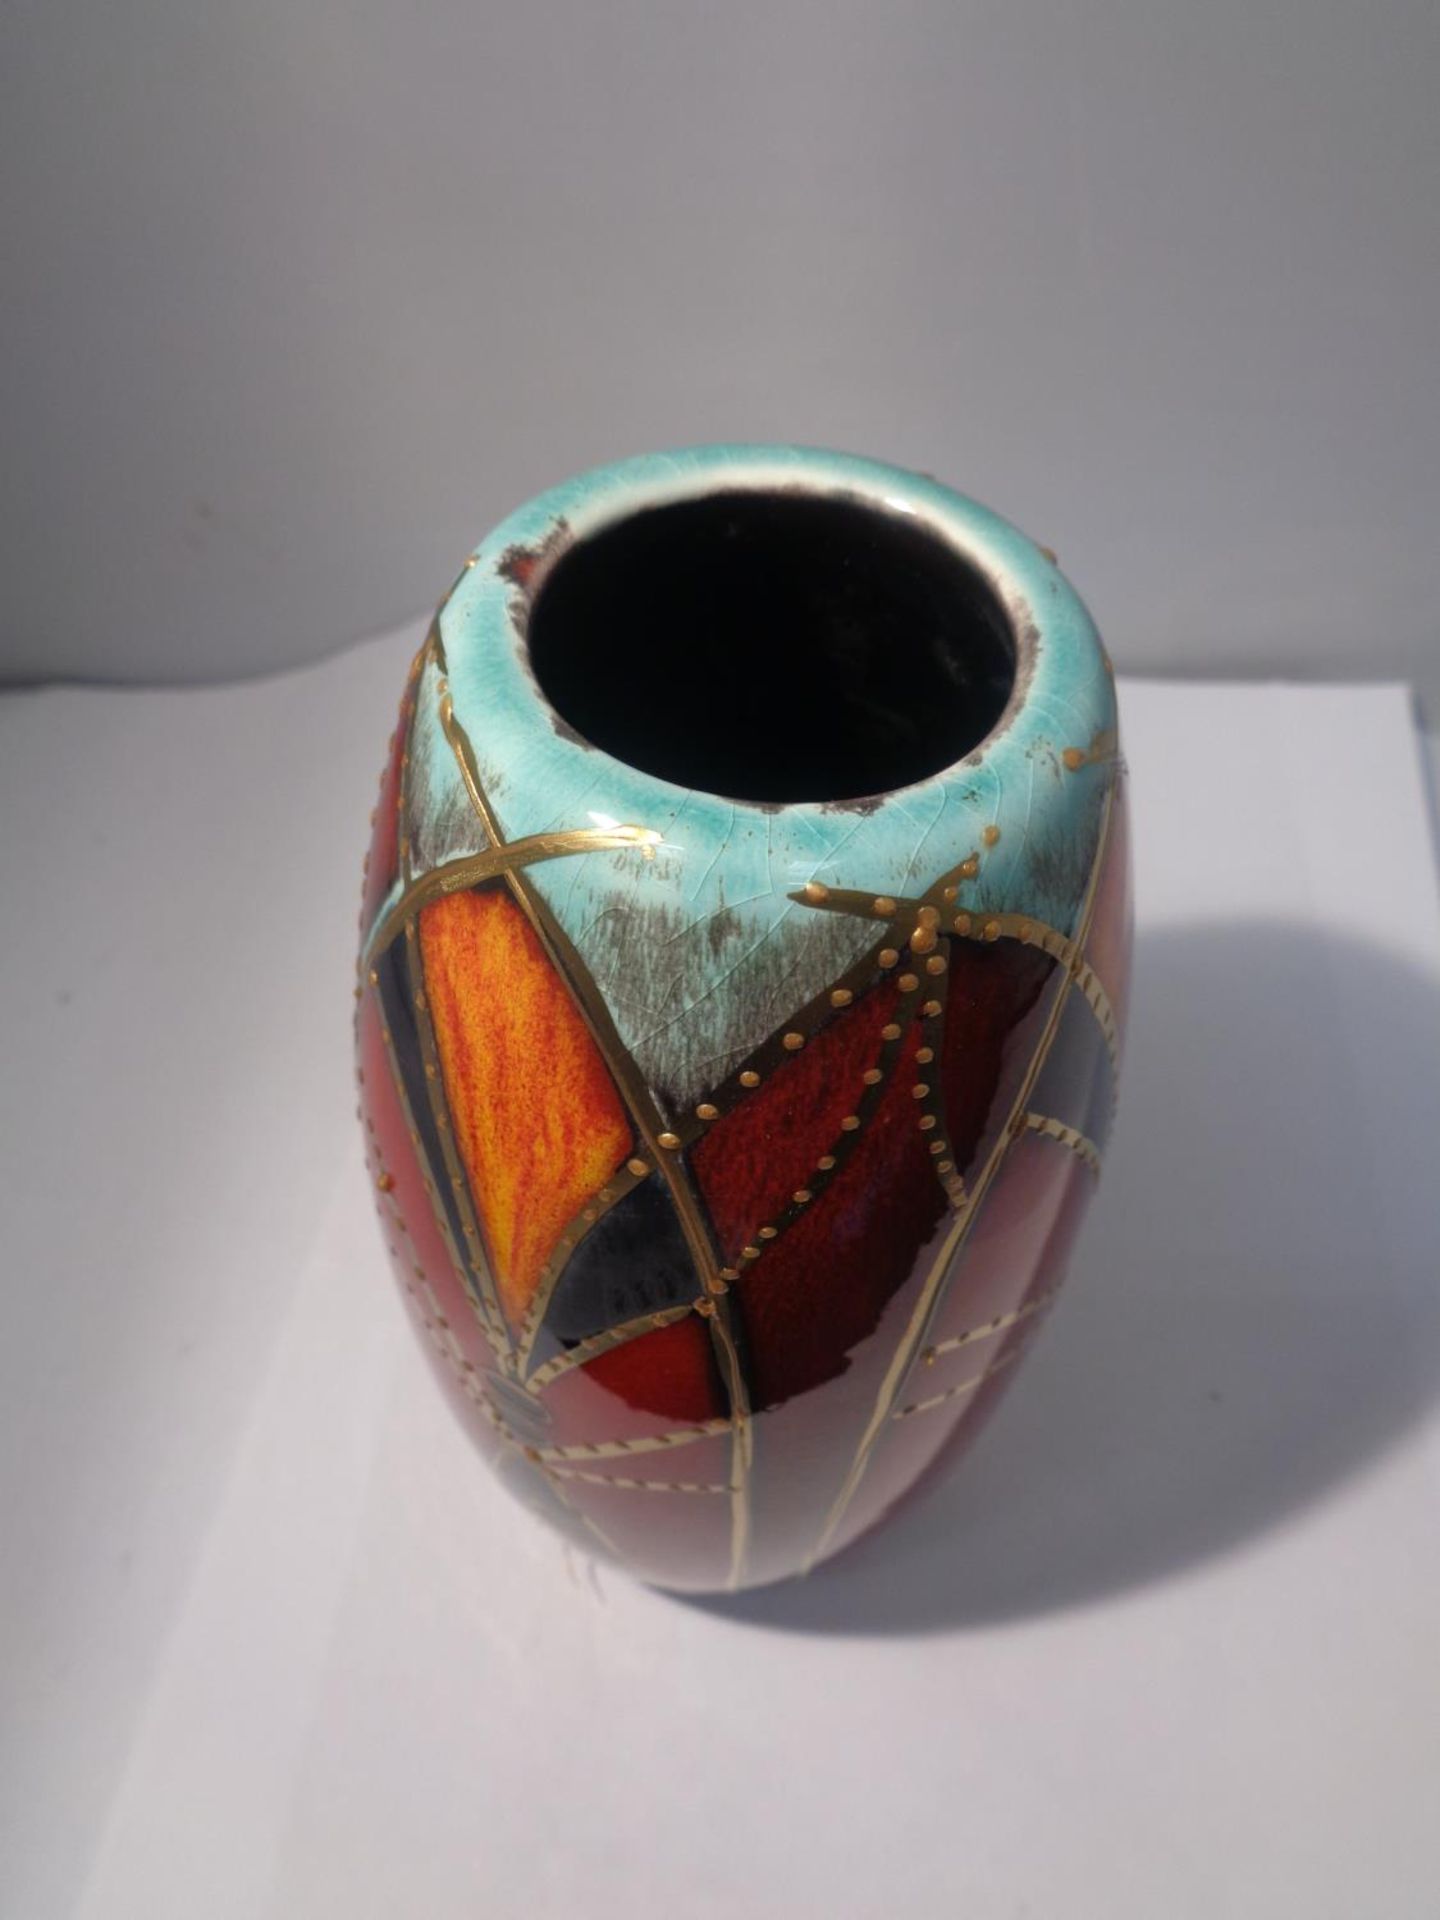 AN ANITA HARRIS HAND PAINTED GOTHIC ARCHES VASE SIGNED IN GOLD - Image 3 of 4